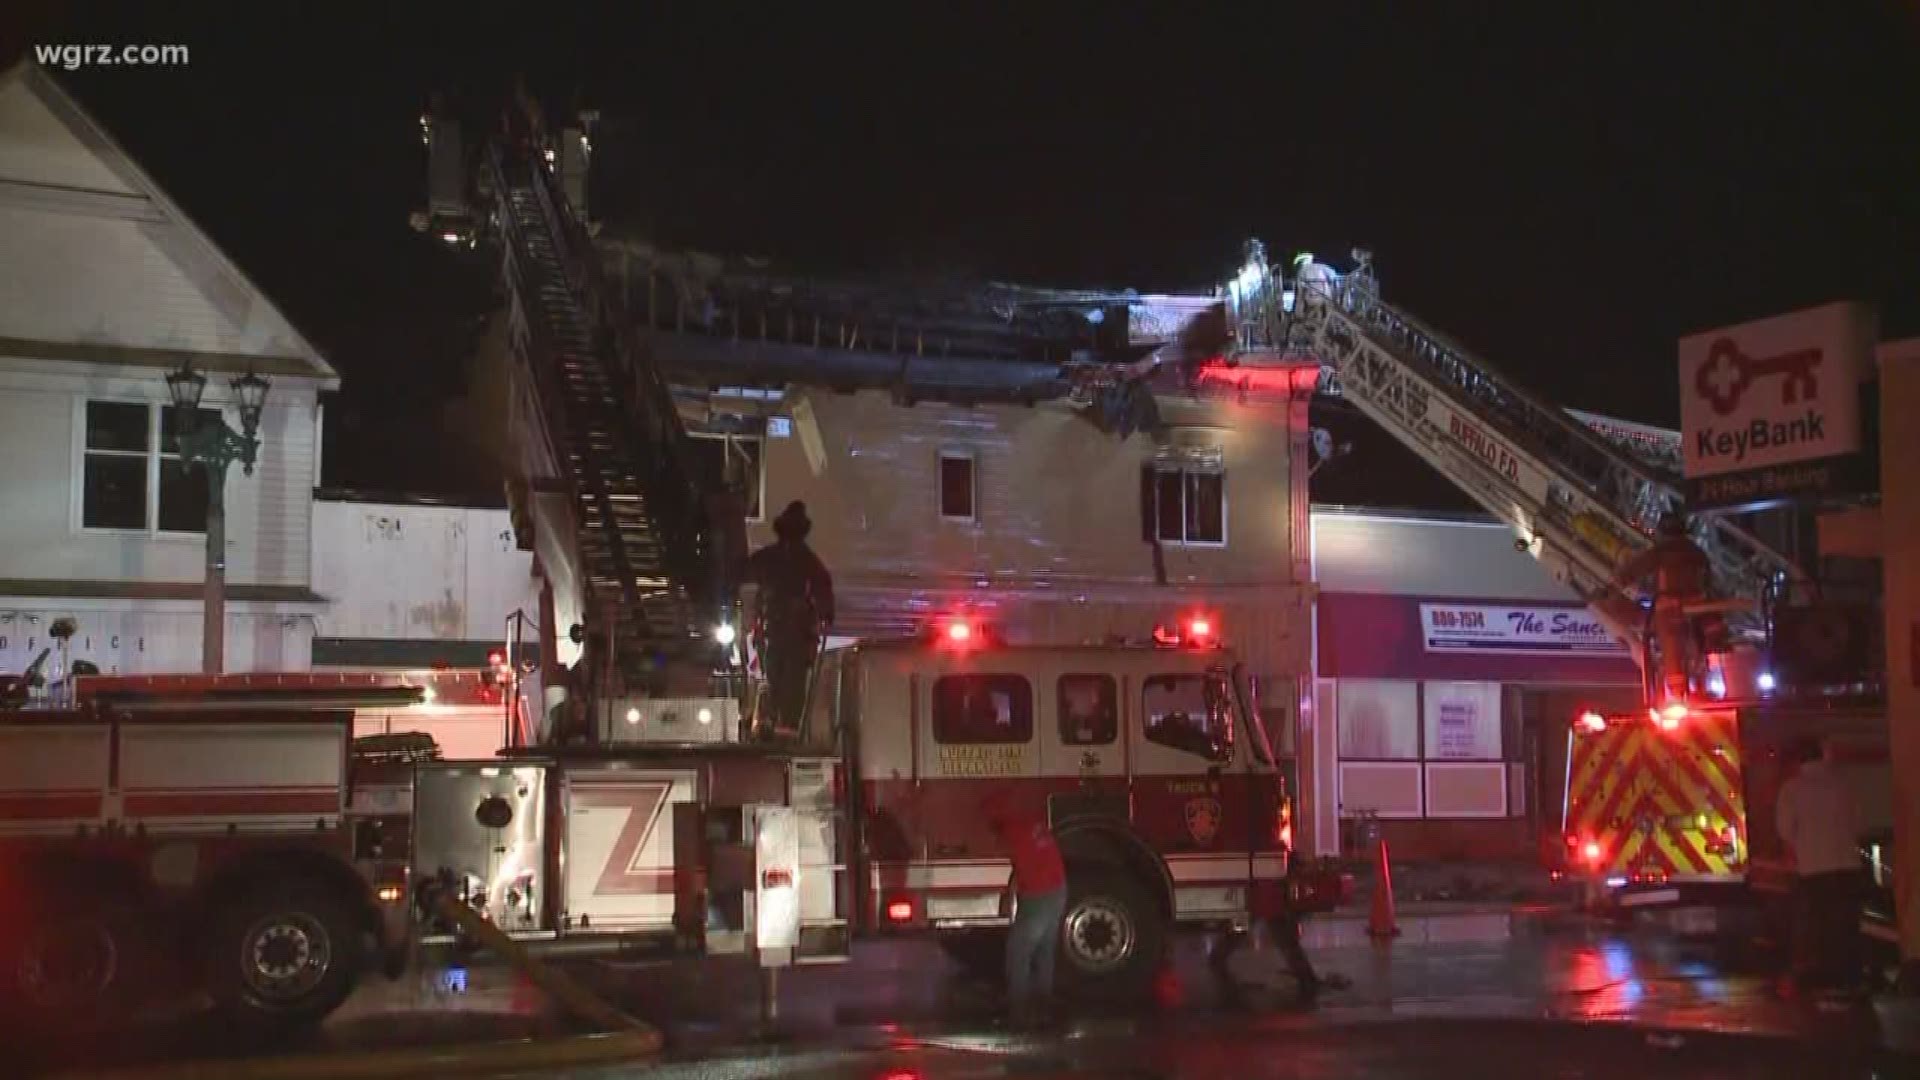 One person dead, two others hospitalized during overnight fire at a South Buffalo bar.